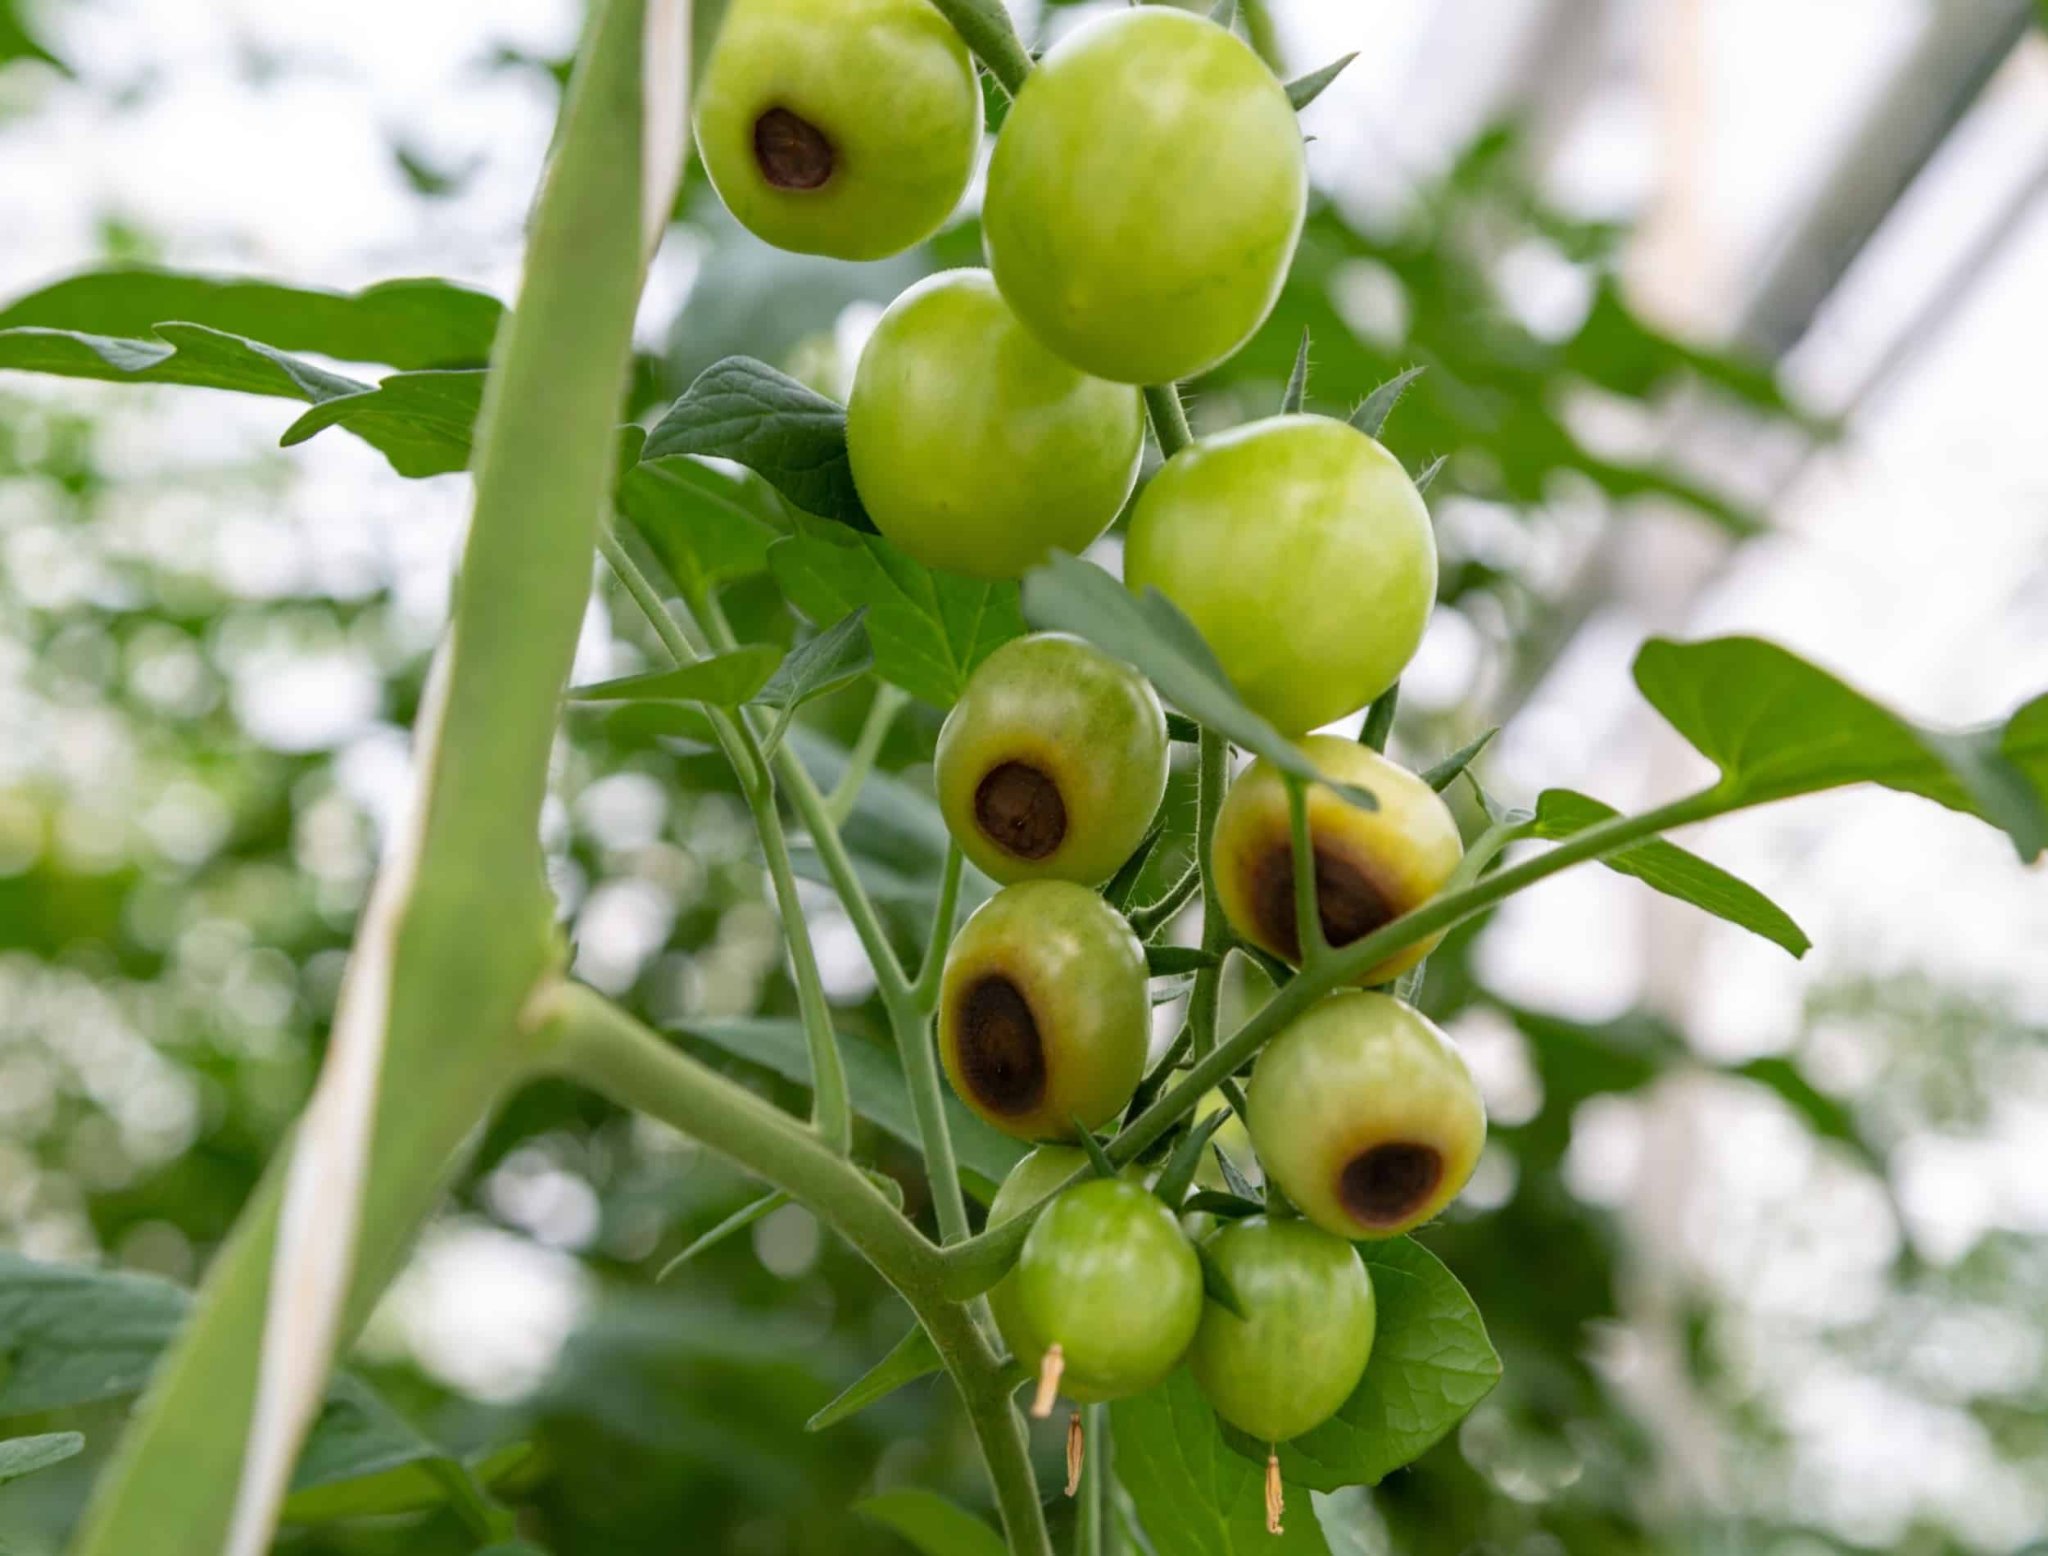 How To Fight Blossom End Rot on Tomato Plants